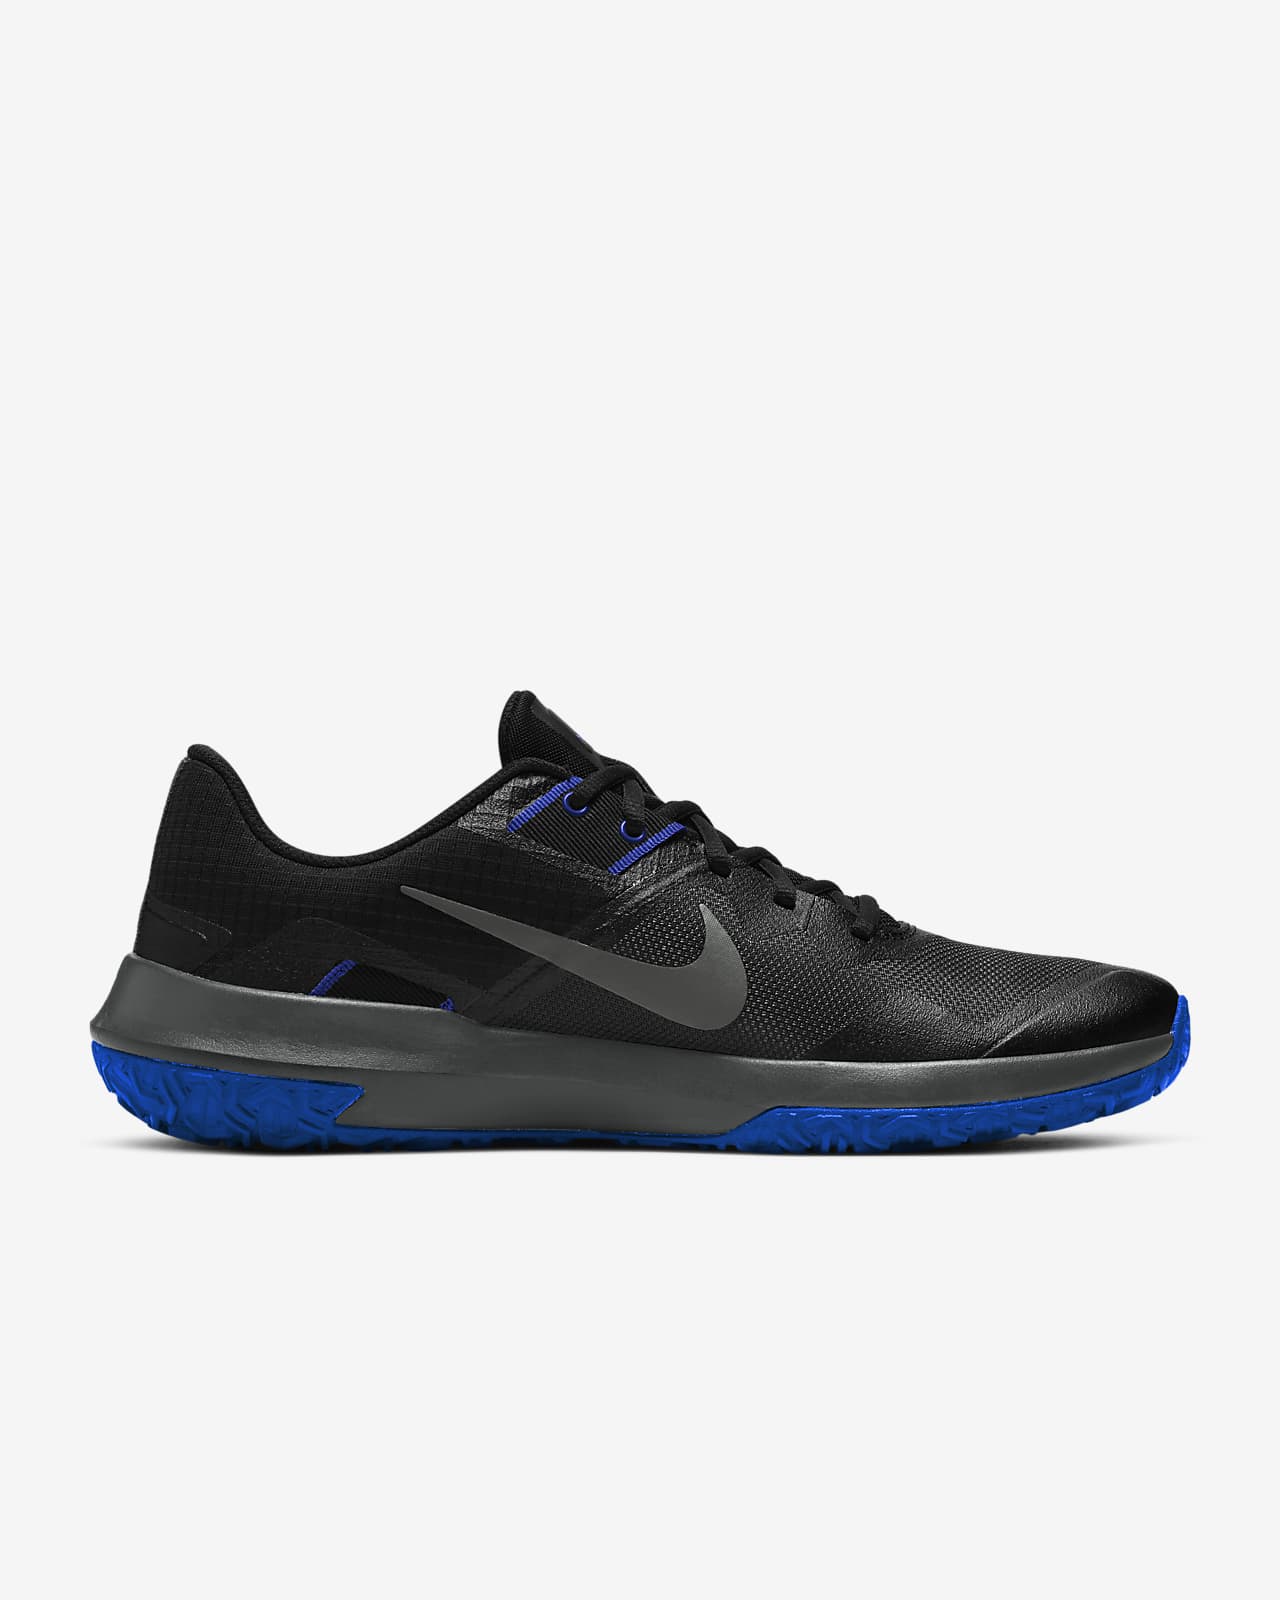 nike compete trainer